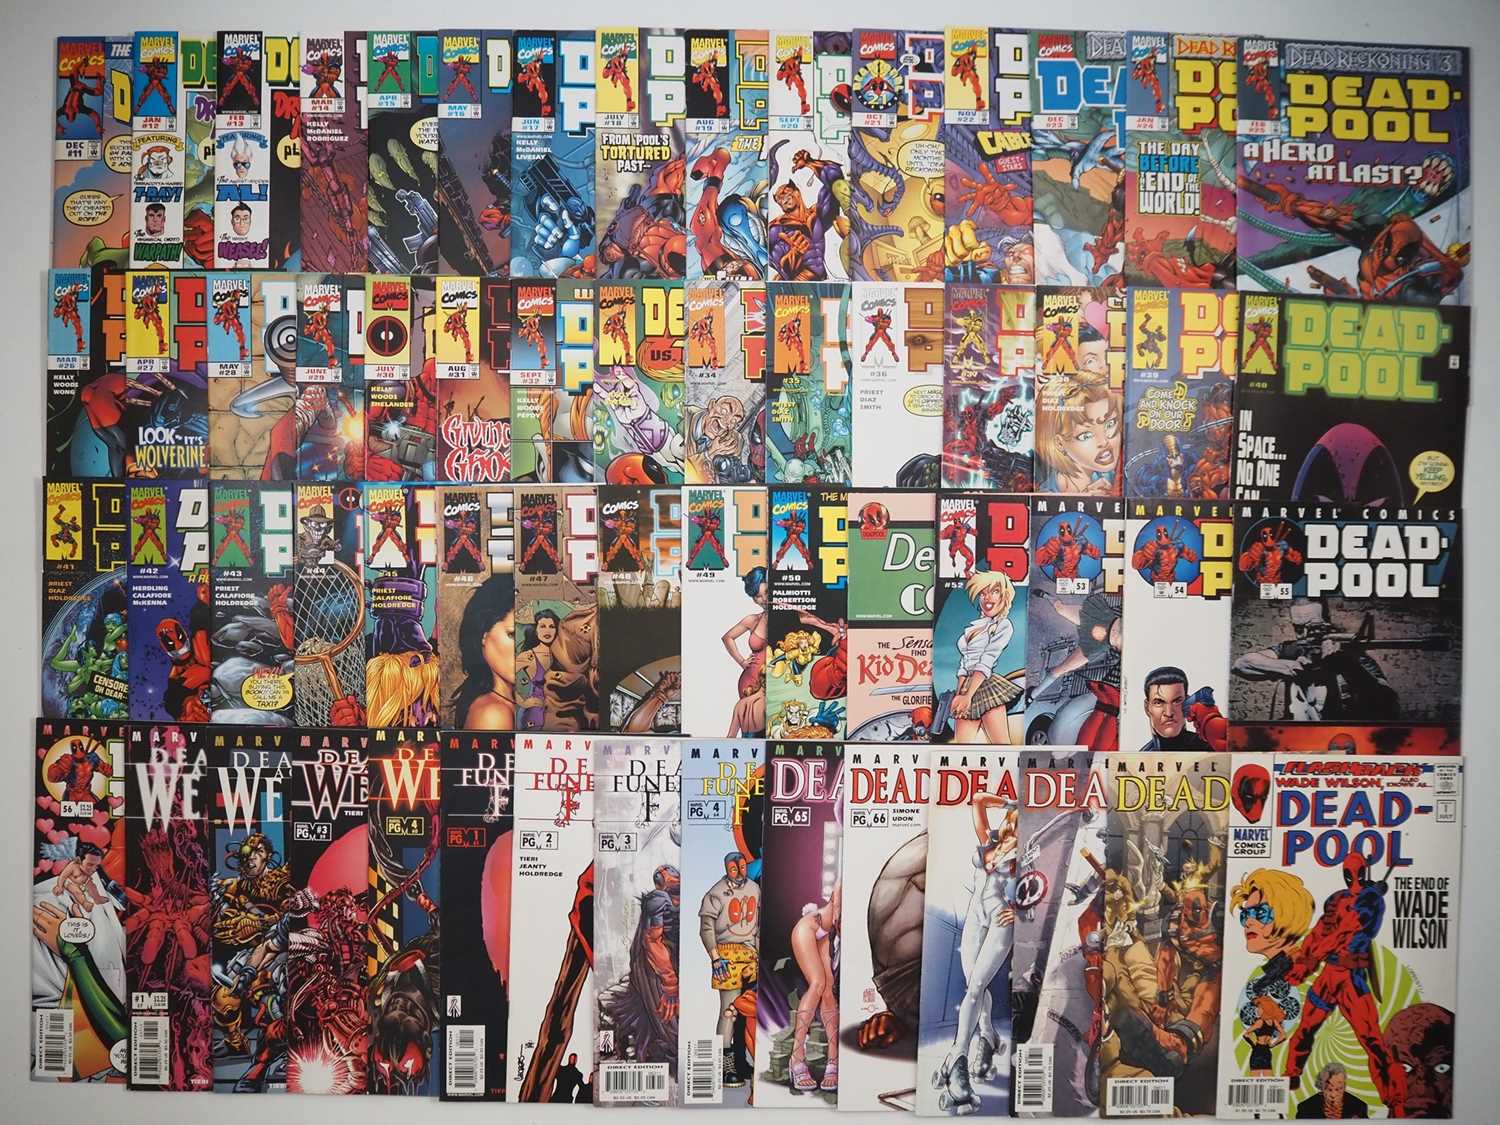 DEADPOOL #11 to 69 + FLASHBACK Minus 1 (60 in Lot) - (1997/2001 - MARVEL) - Includes first